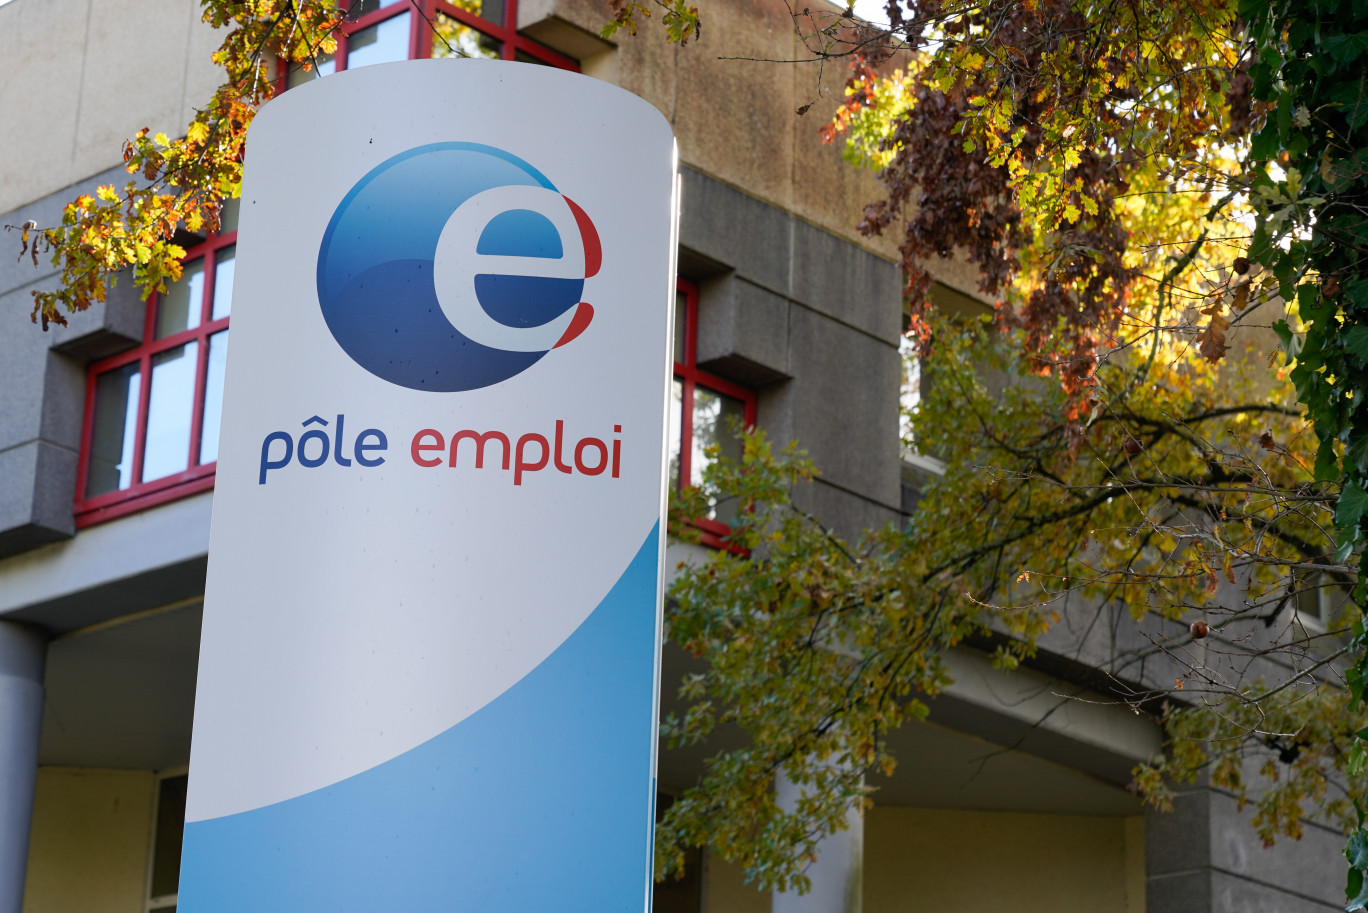 Bordeaux , Aquitaine / France - 11 07 2019 : Pole emploi sign logo outside a government agency office french